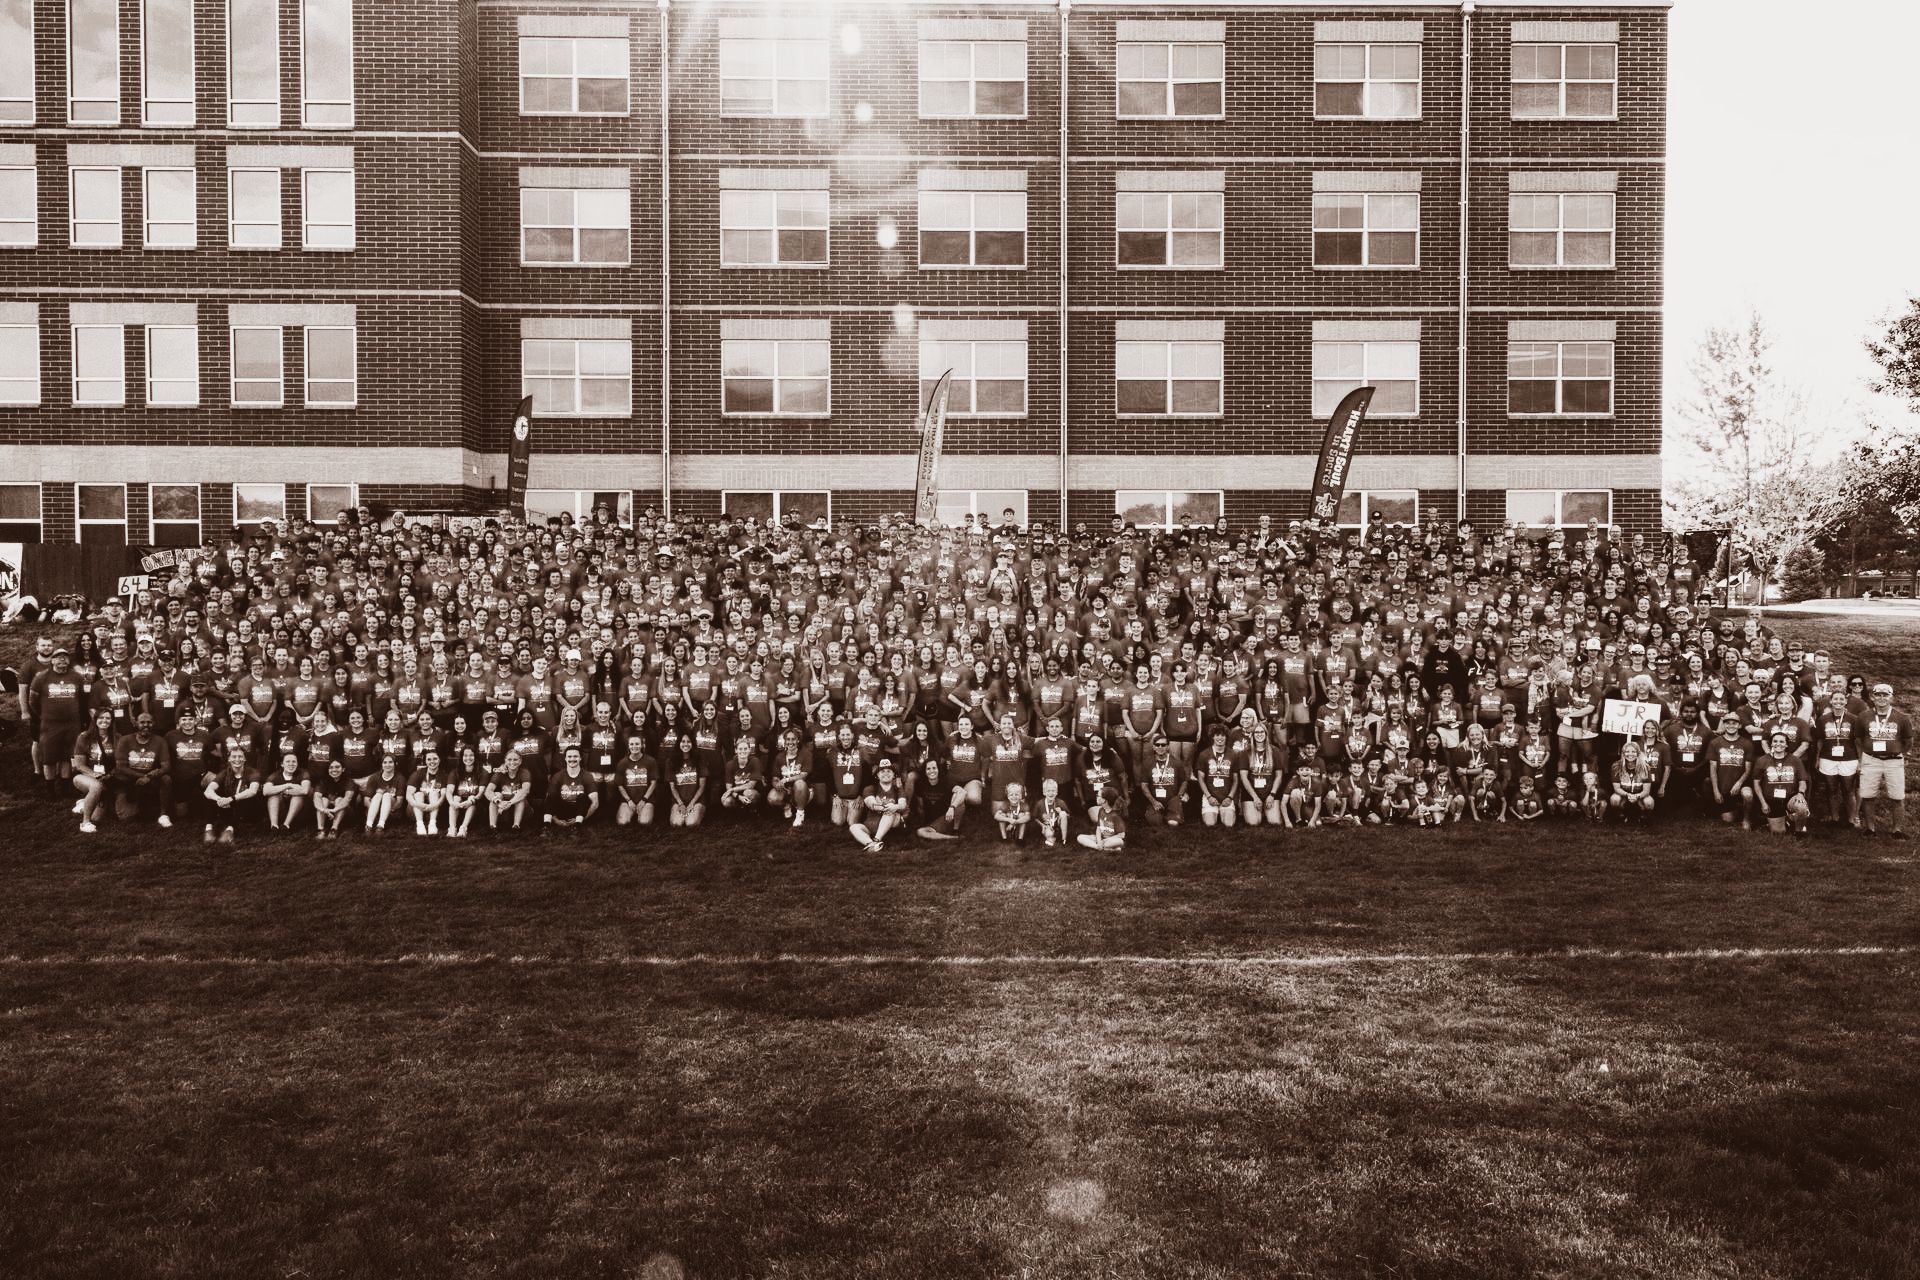 Giant group photo of last year's campers